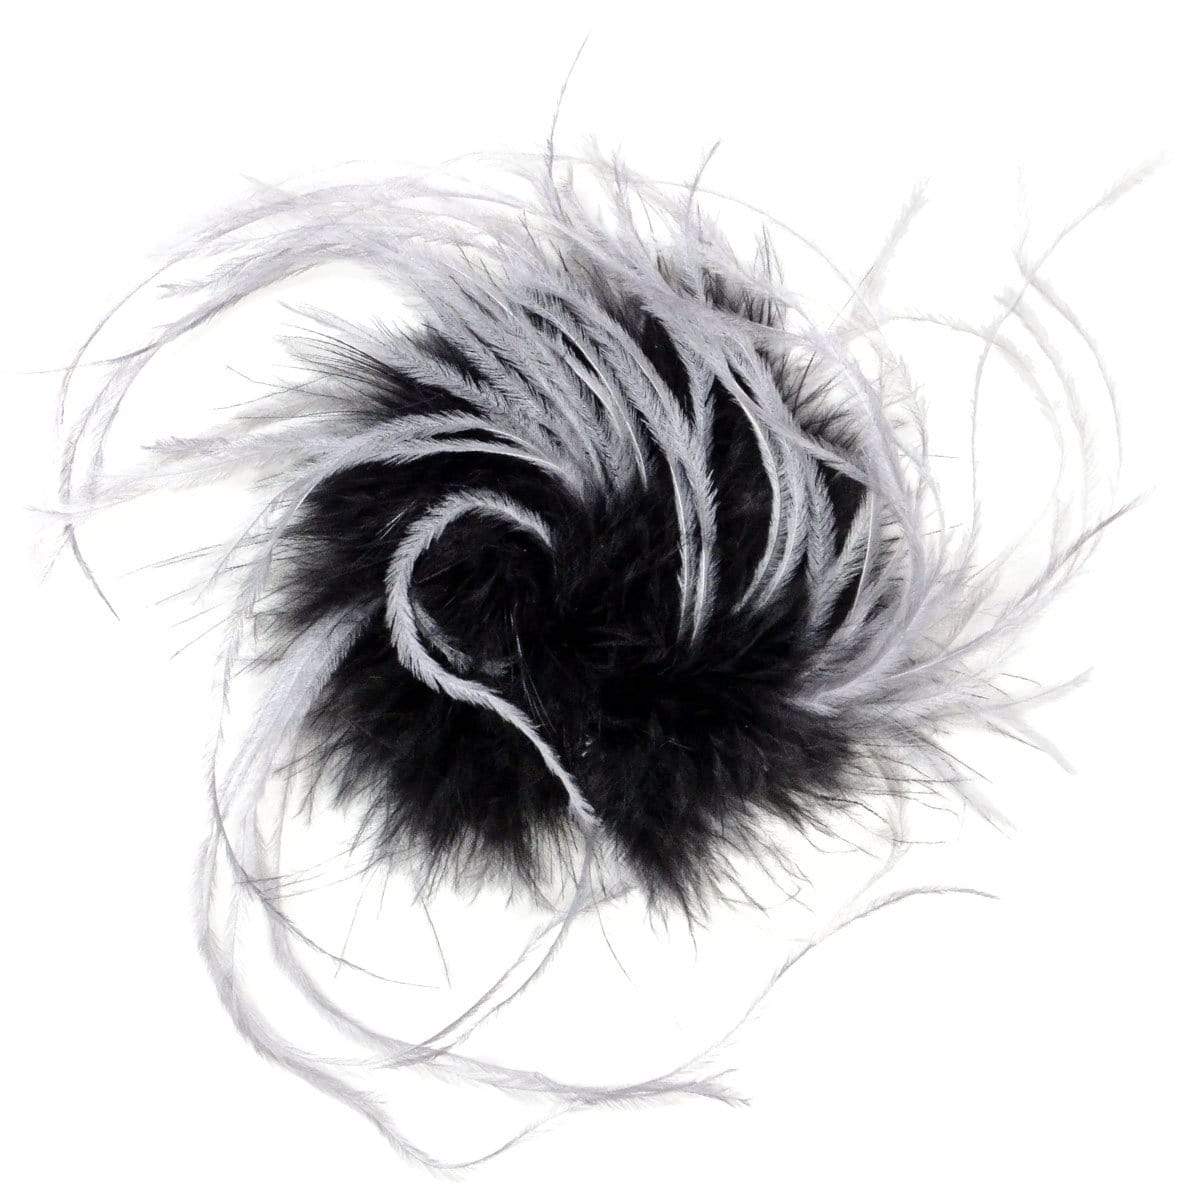 Ostrich Feather Brooch in Black and light gray | Handmade in Seattle WA | Pandemonium Millinery